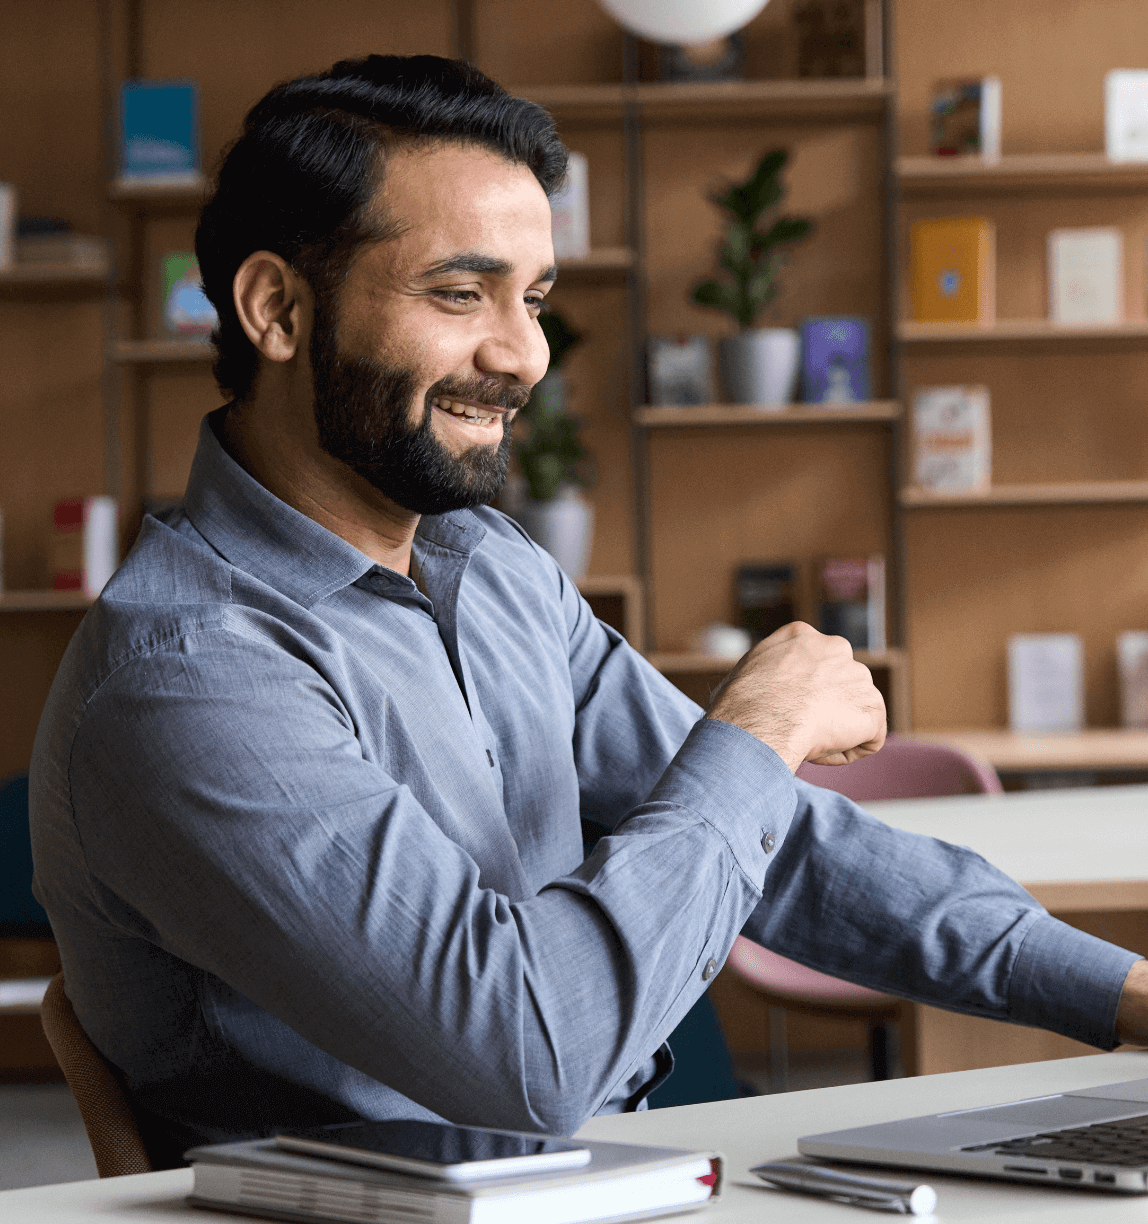 Man working on laptop and smiling.